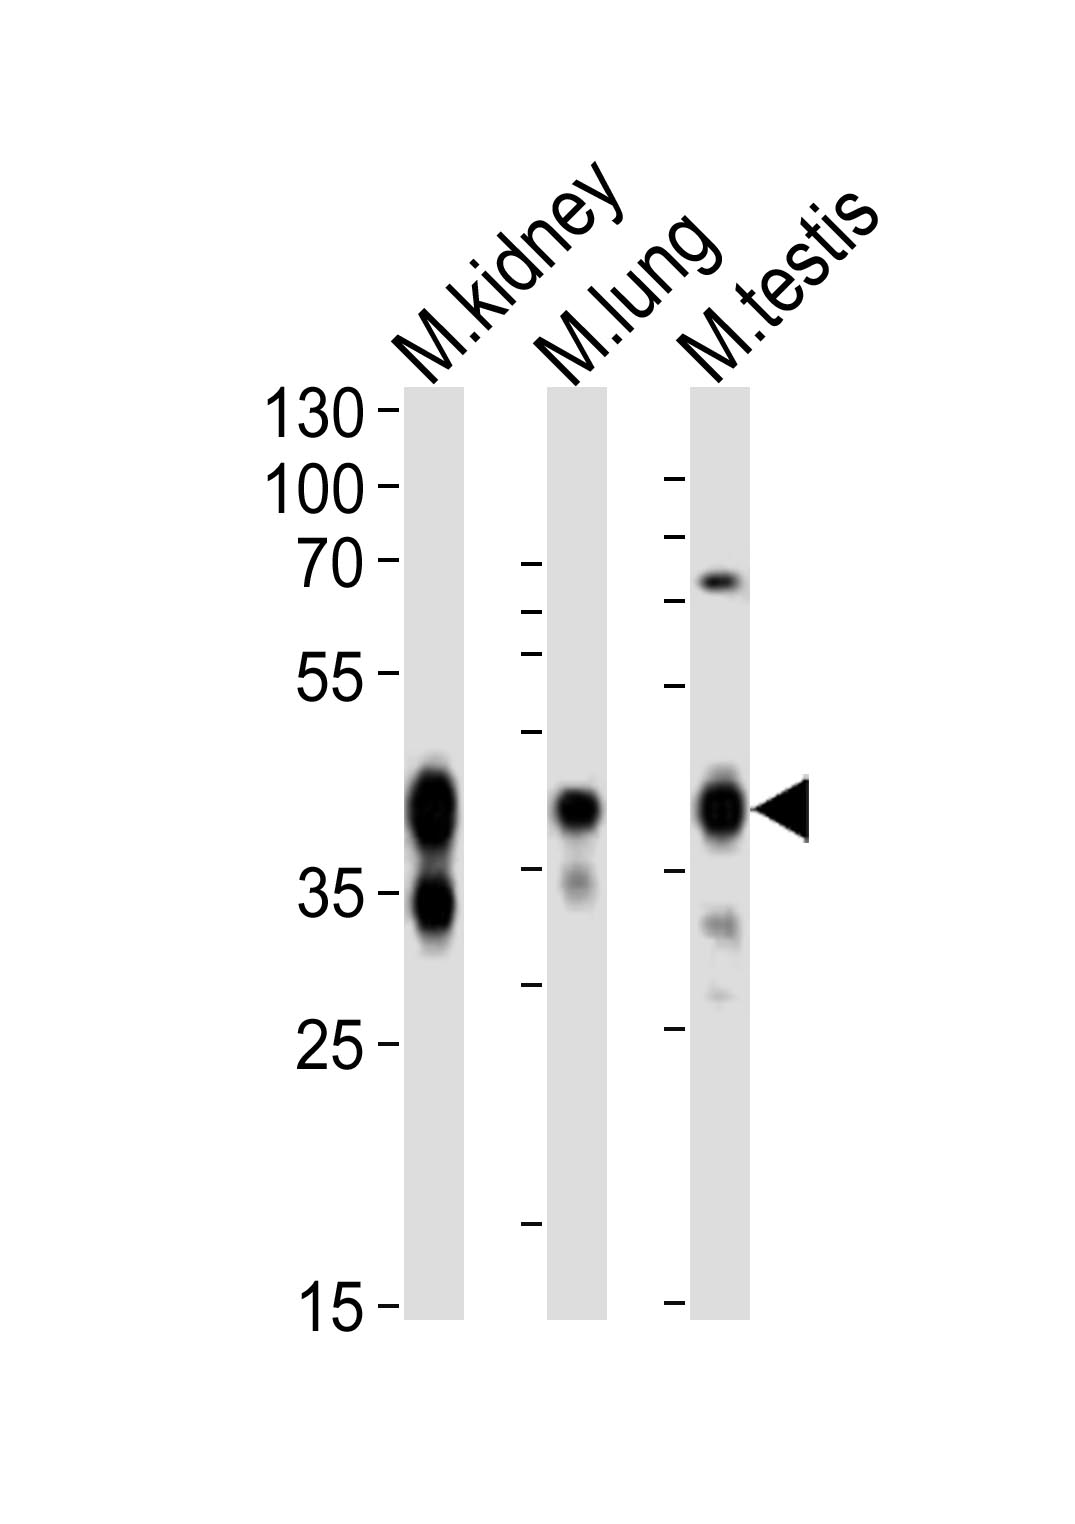 Western blot analysis of lysates from mouse kidney, mouse lung, mouse testis tissue lysate (from left to right),  using Epcam Antibody (C-term)(Cat.  #AP21054a).  AP21054a was diluted at 1:1000 at each lane.  A goat anti-rabbit IgG H&L(HRP) at 1:10000 dilution was used as the secondary antibody. Lysates at 20ug per lane.